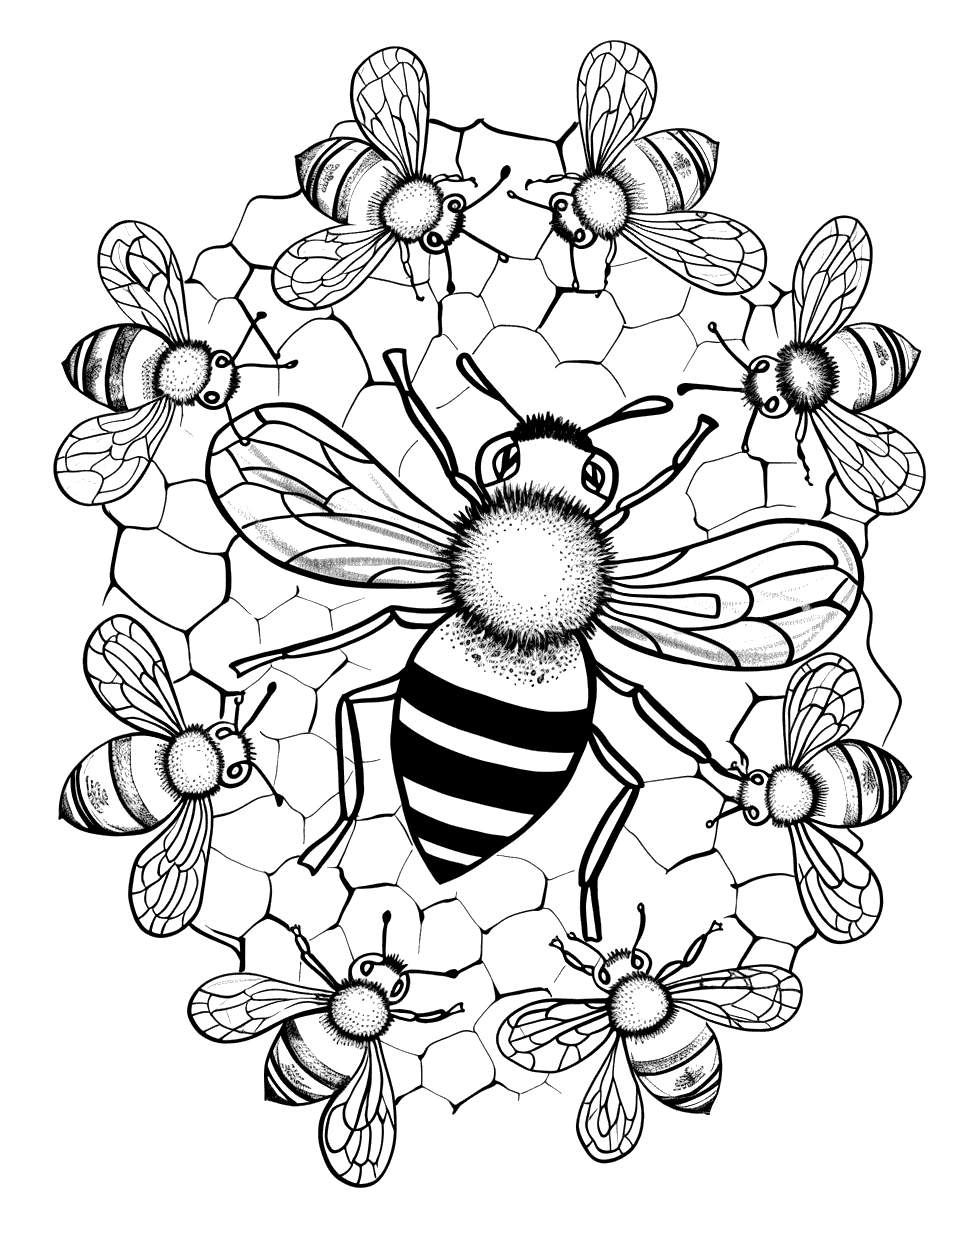 Queen Bee in the Hive Coloring Page - The queen bee surrounded by her worker bees inside the hive.